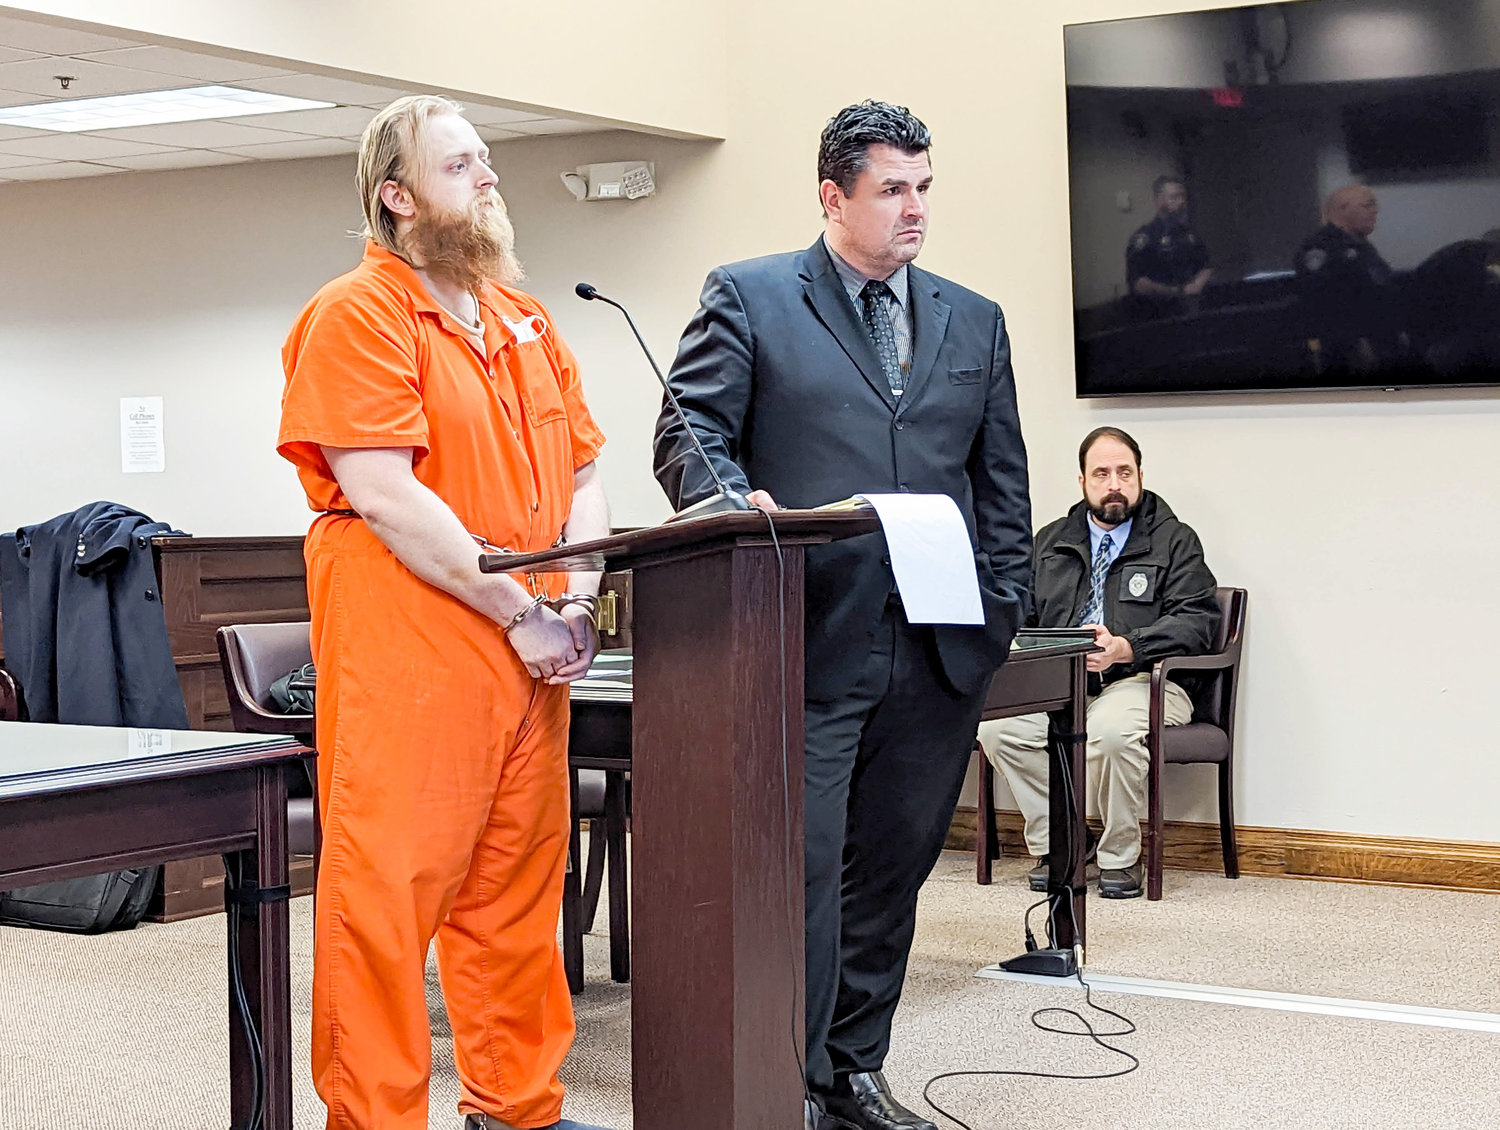 Matthew Westcott appears in court with his lawyer in this file photo from Oneida County Court. He is accused in the shooting death of his brother James Westcott in their Taberg family home.